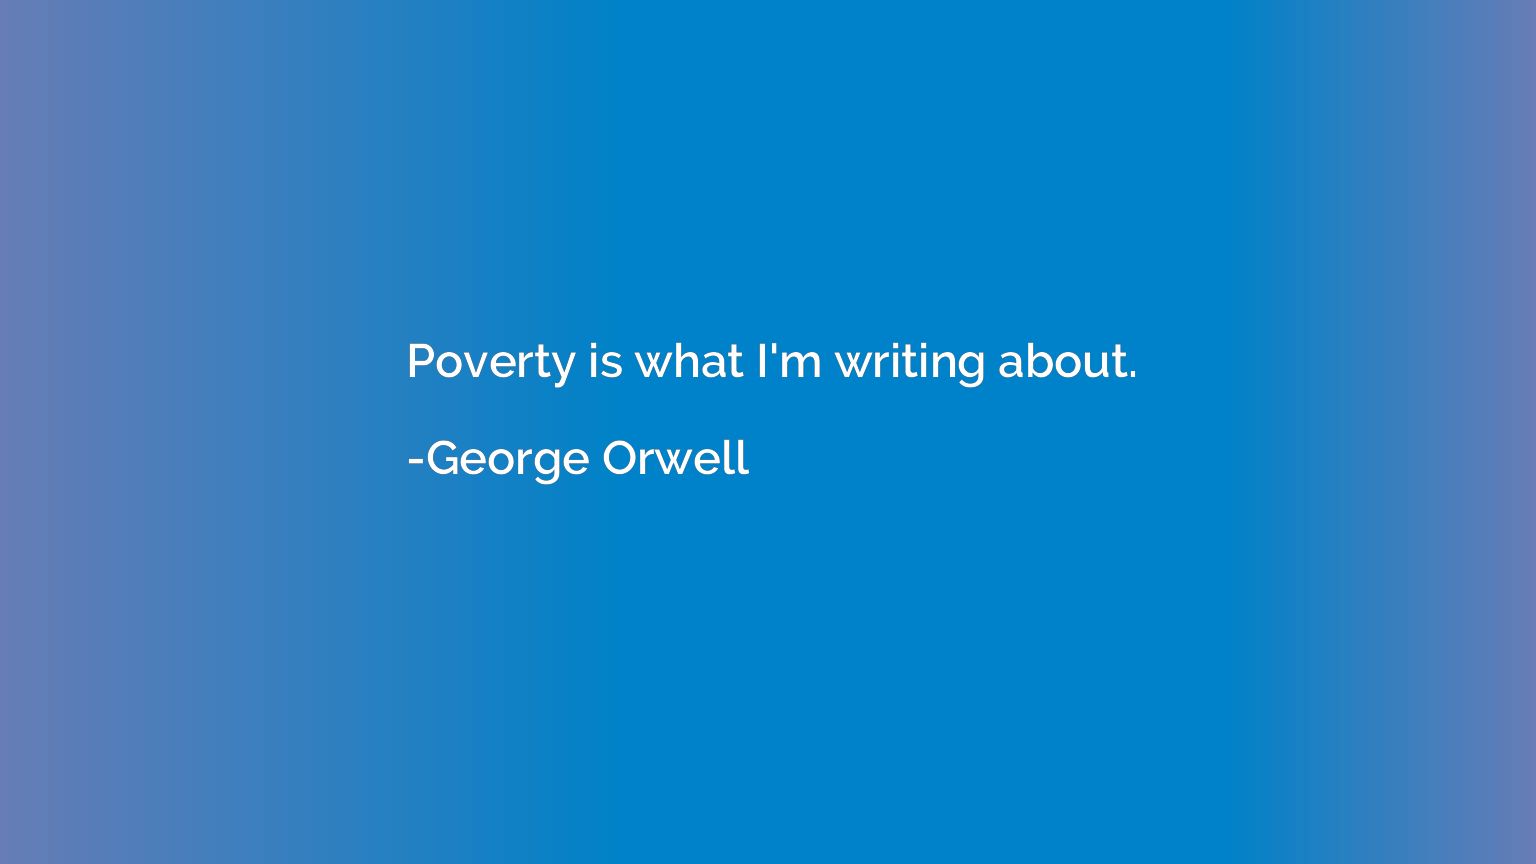 Poverty is what I'm writing about.